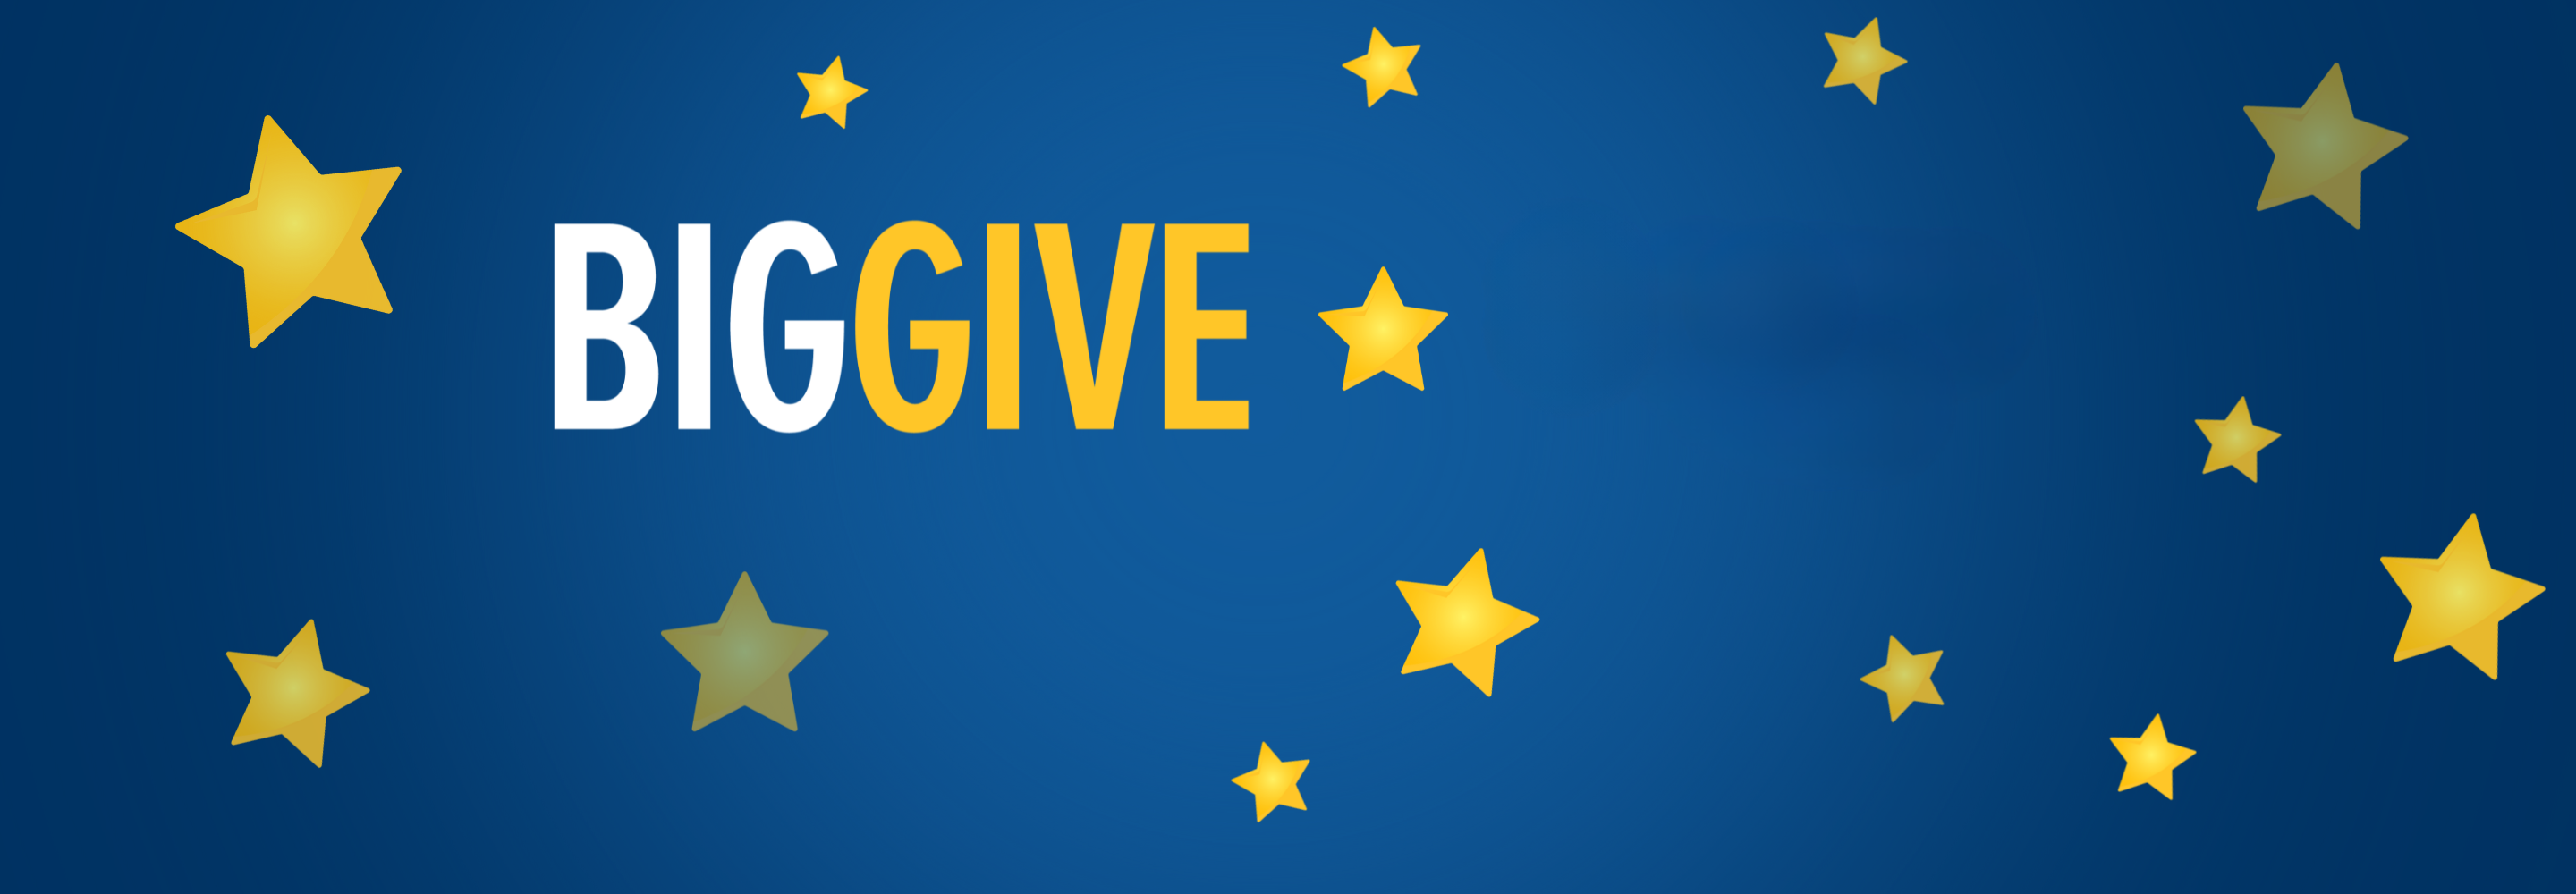 Big Give logo and stars on a blue background